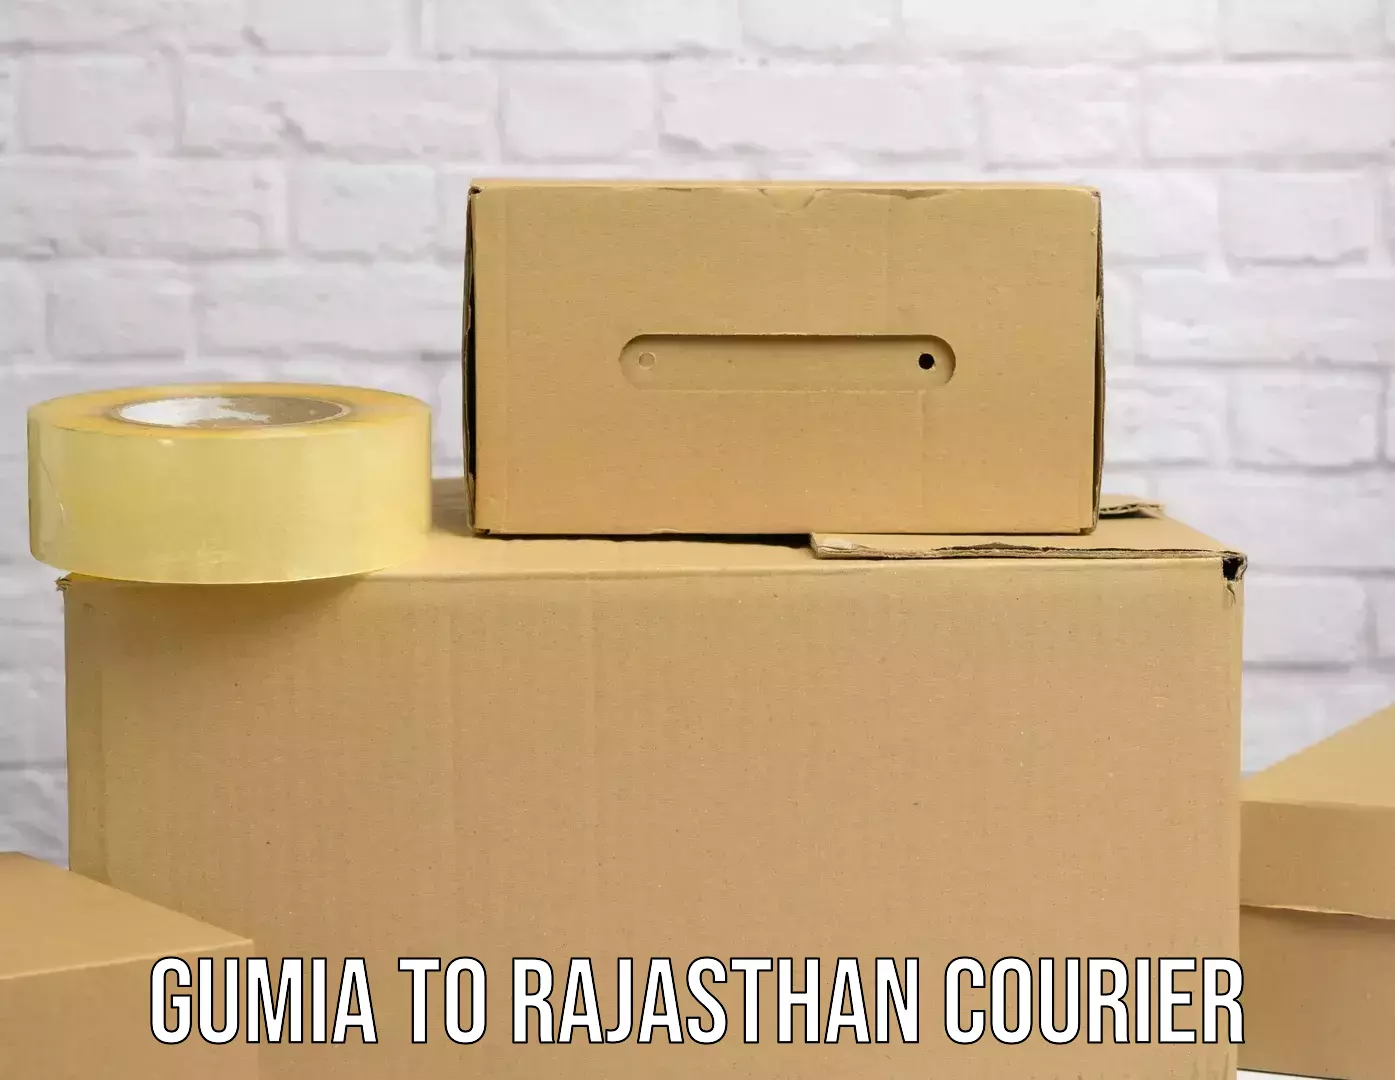 Multi-national courier services Gumia to Mahwa